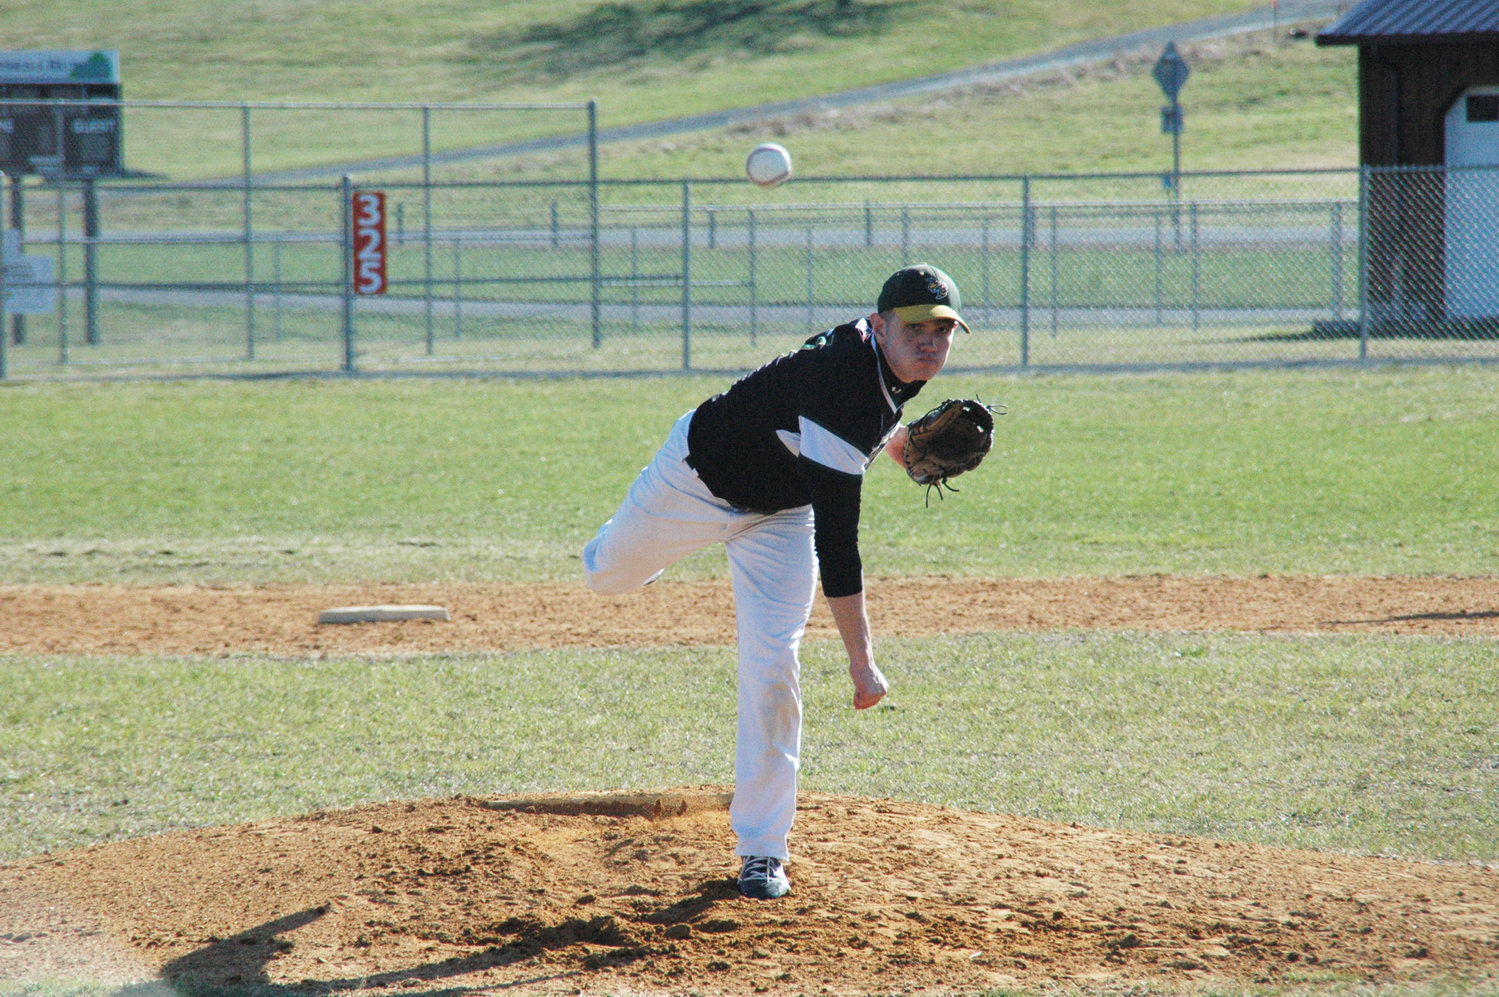 Matt Ranaudo started Tuesday’s game for the Yellowjackets and pitched 4.2 innings, giving up just one hit and striking out five Bears on the way to a non-league win. All three runs given up during his time on the mound were unearned.